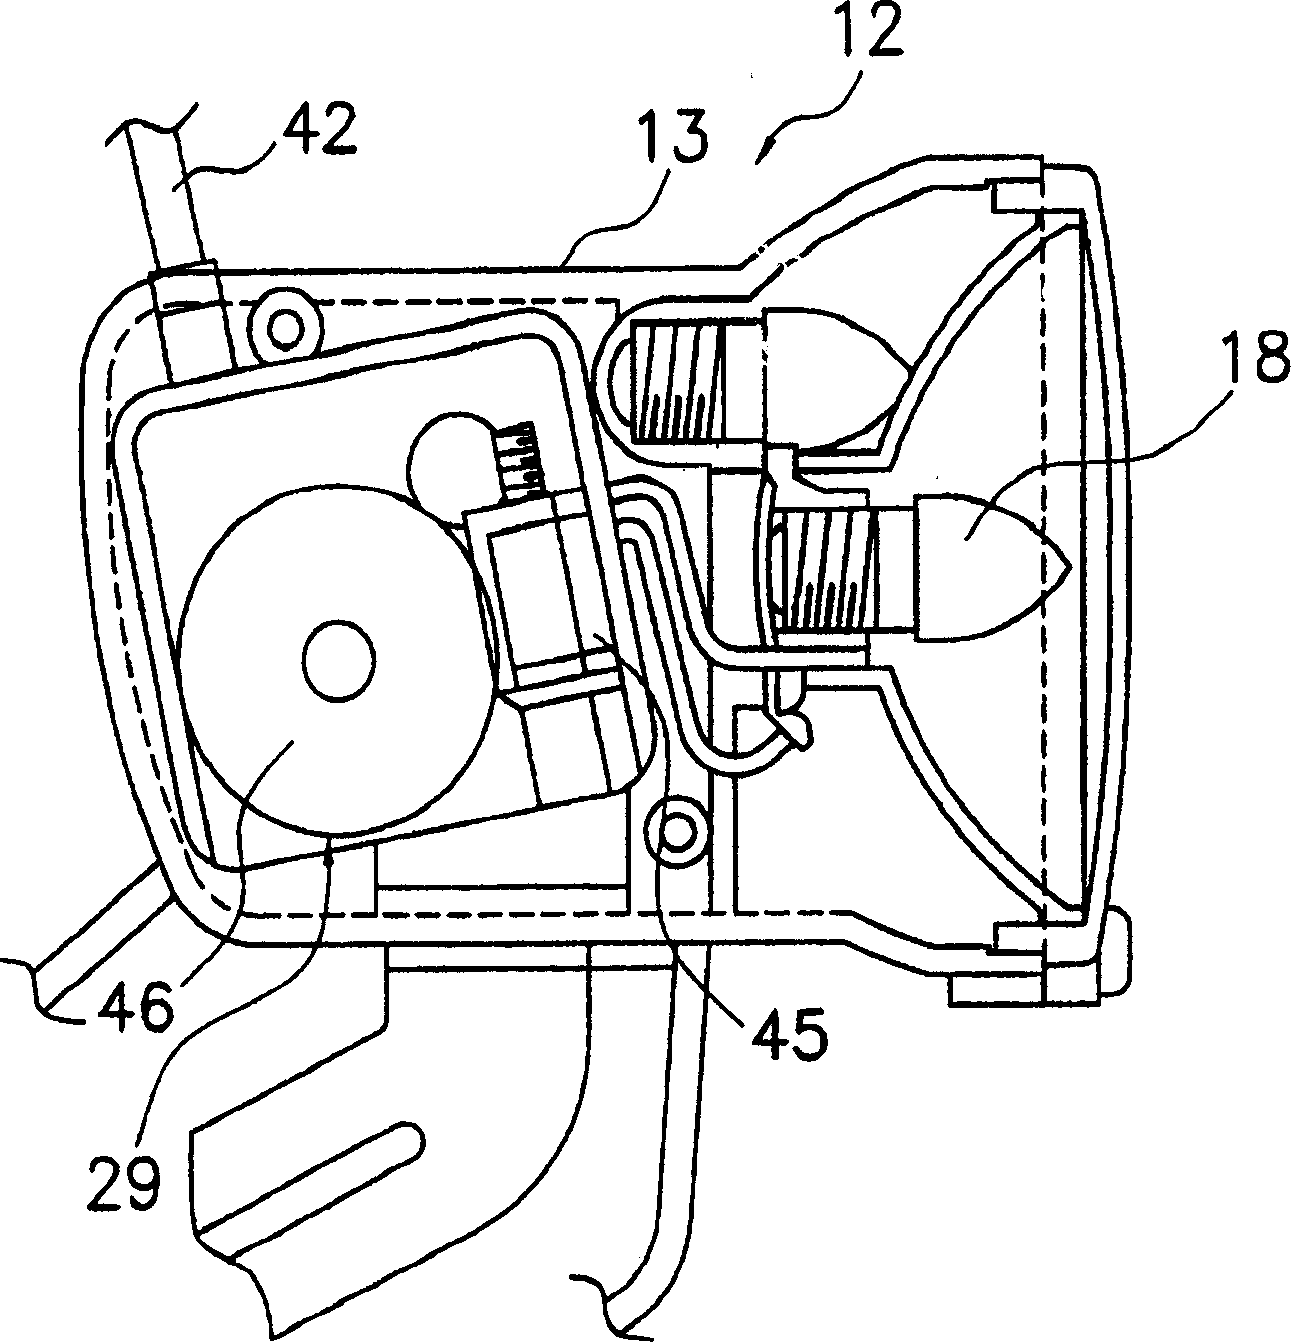 Power supply device for bicycle